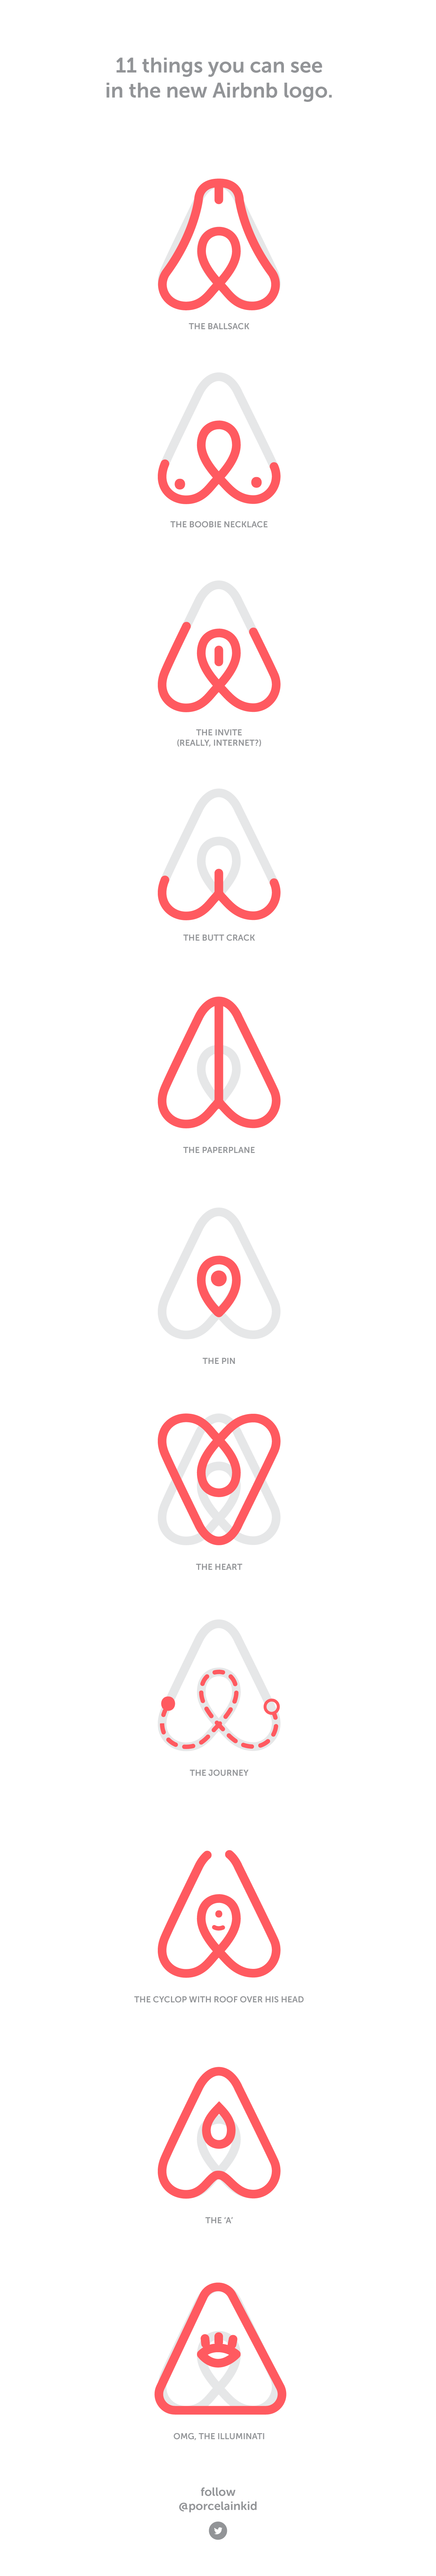 Airbnb New Logo - 11 Things You Can See in the New Airbnb Logo – Joe Pacal – Medium